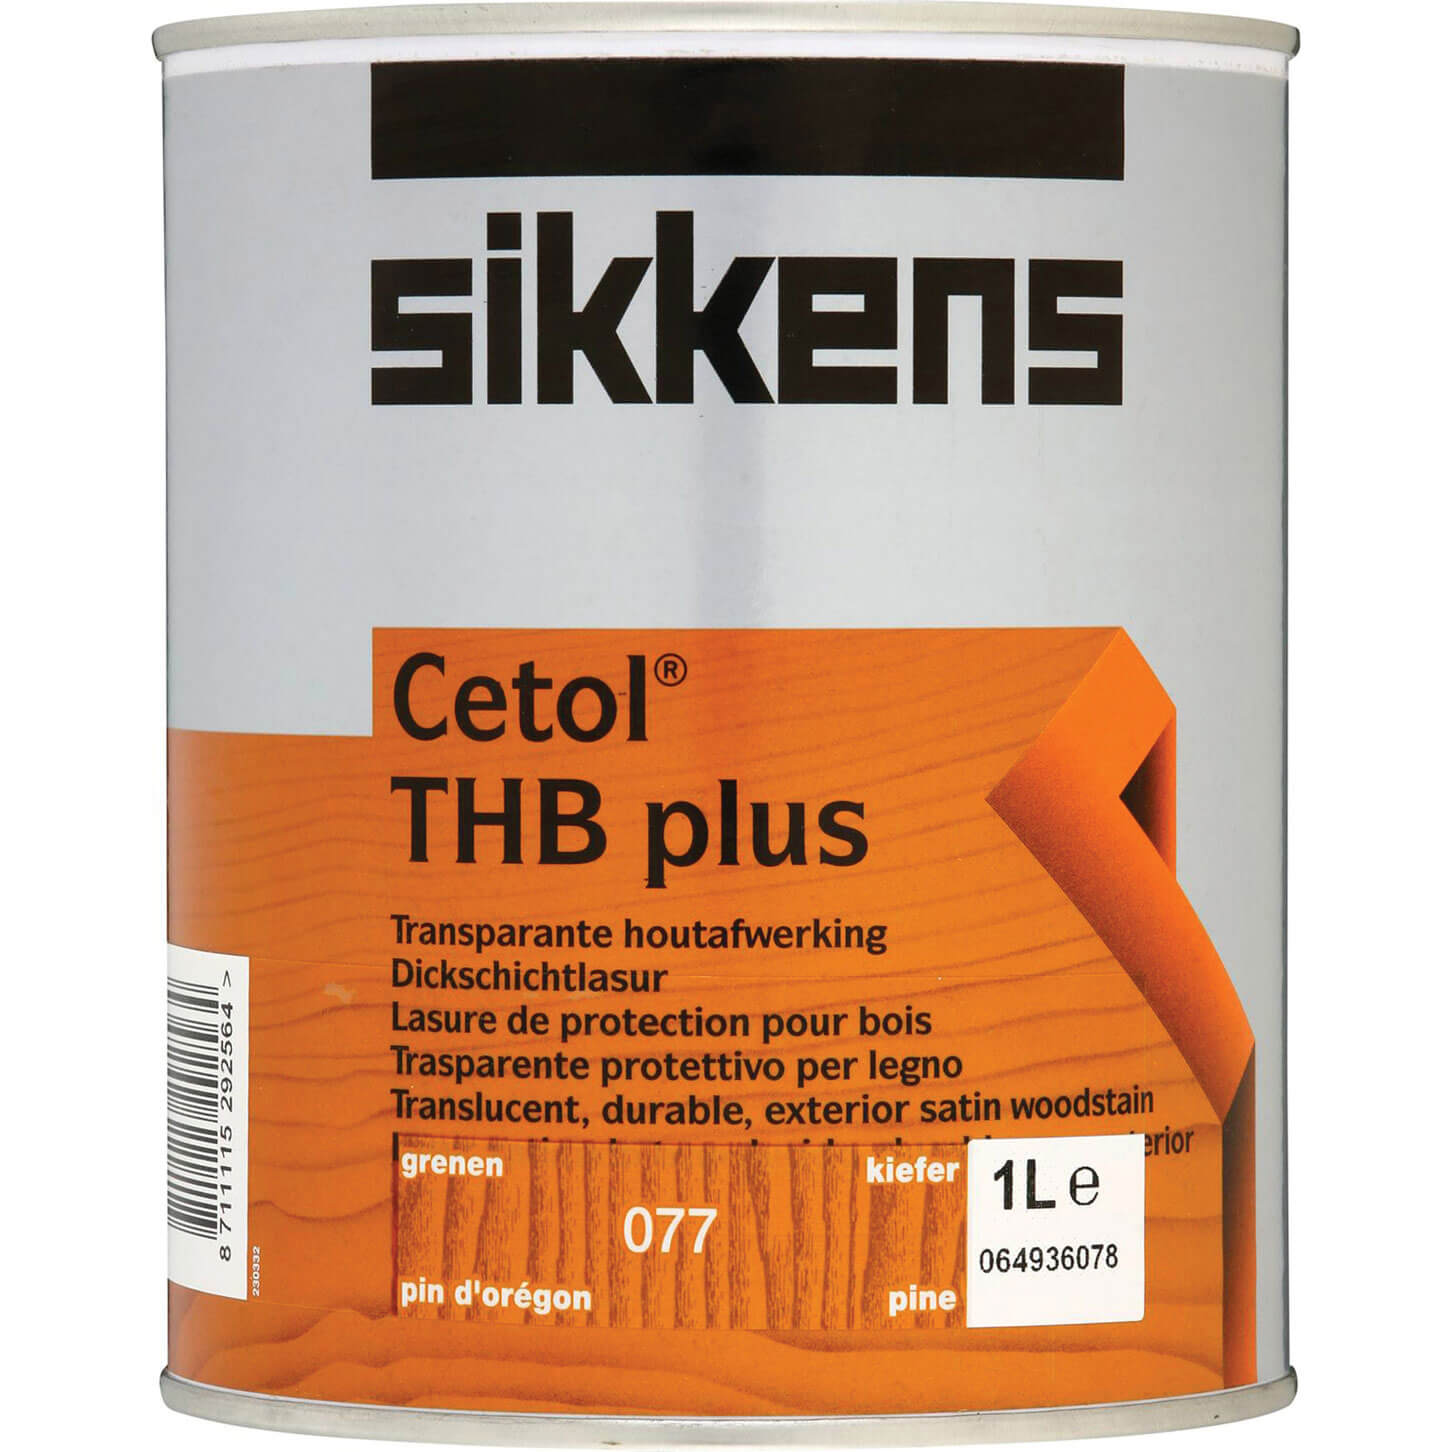 Sikkens Cetol TBH Plus Translucent Wood Stain Pine 1 Litre